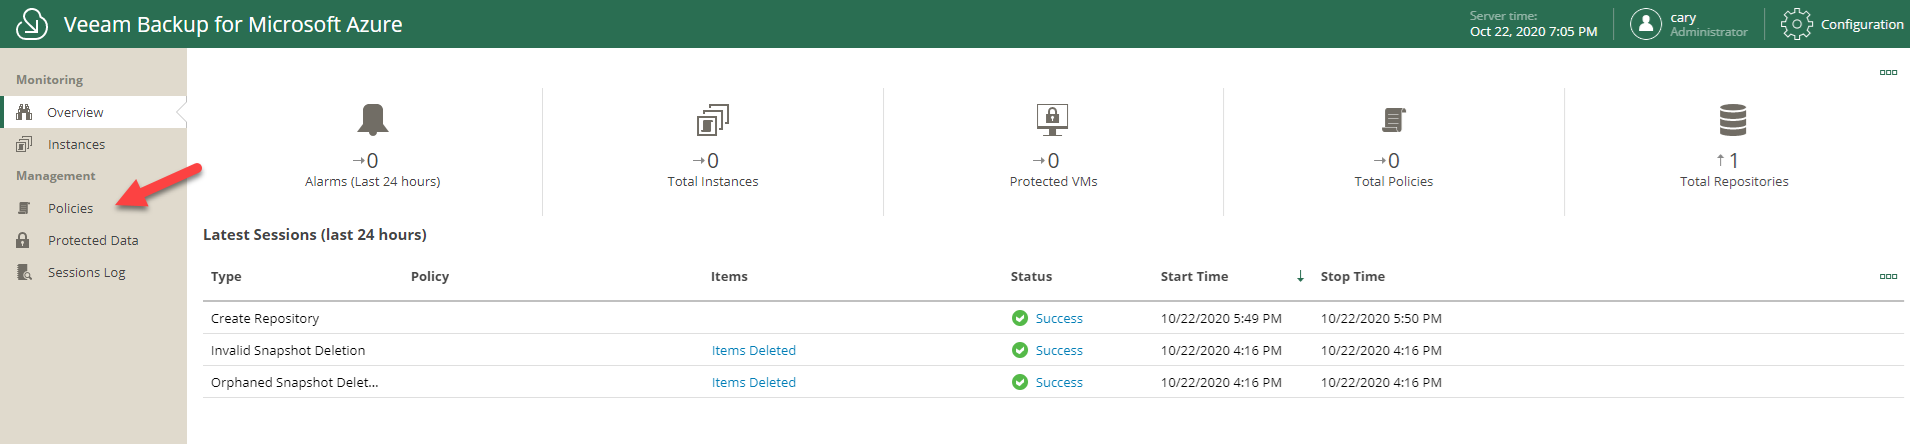 102220 2115 HowtoConfig38 - How to configure Veeam Backup for Microsoft Azure 1.0 with auto create service account